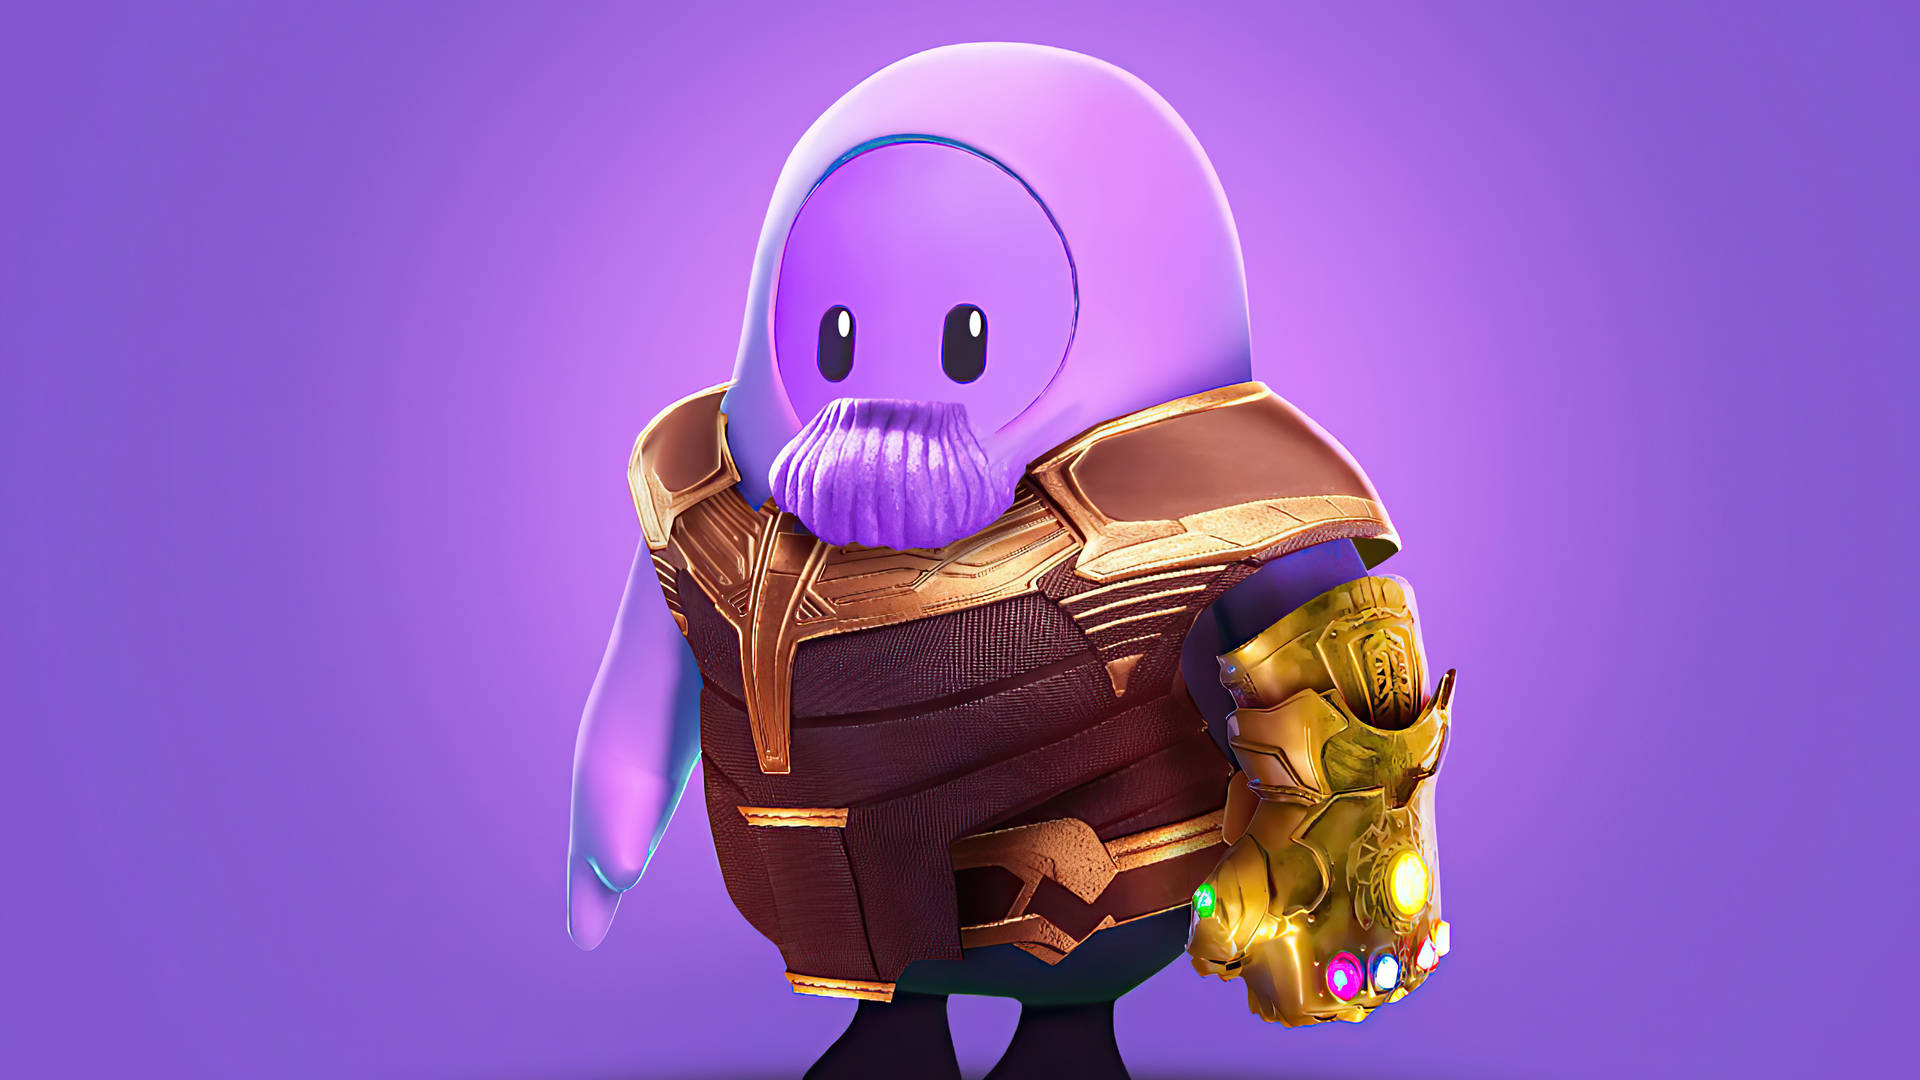 Fall Guys Ultimate Knockout Thanos Skin